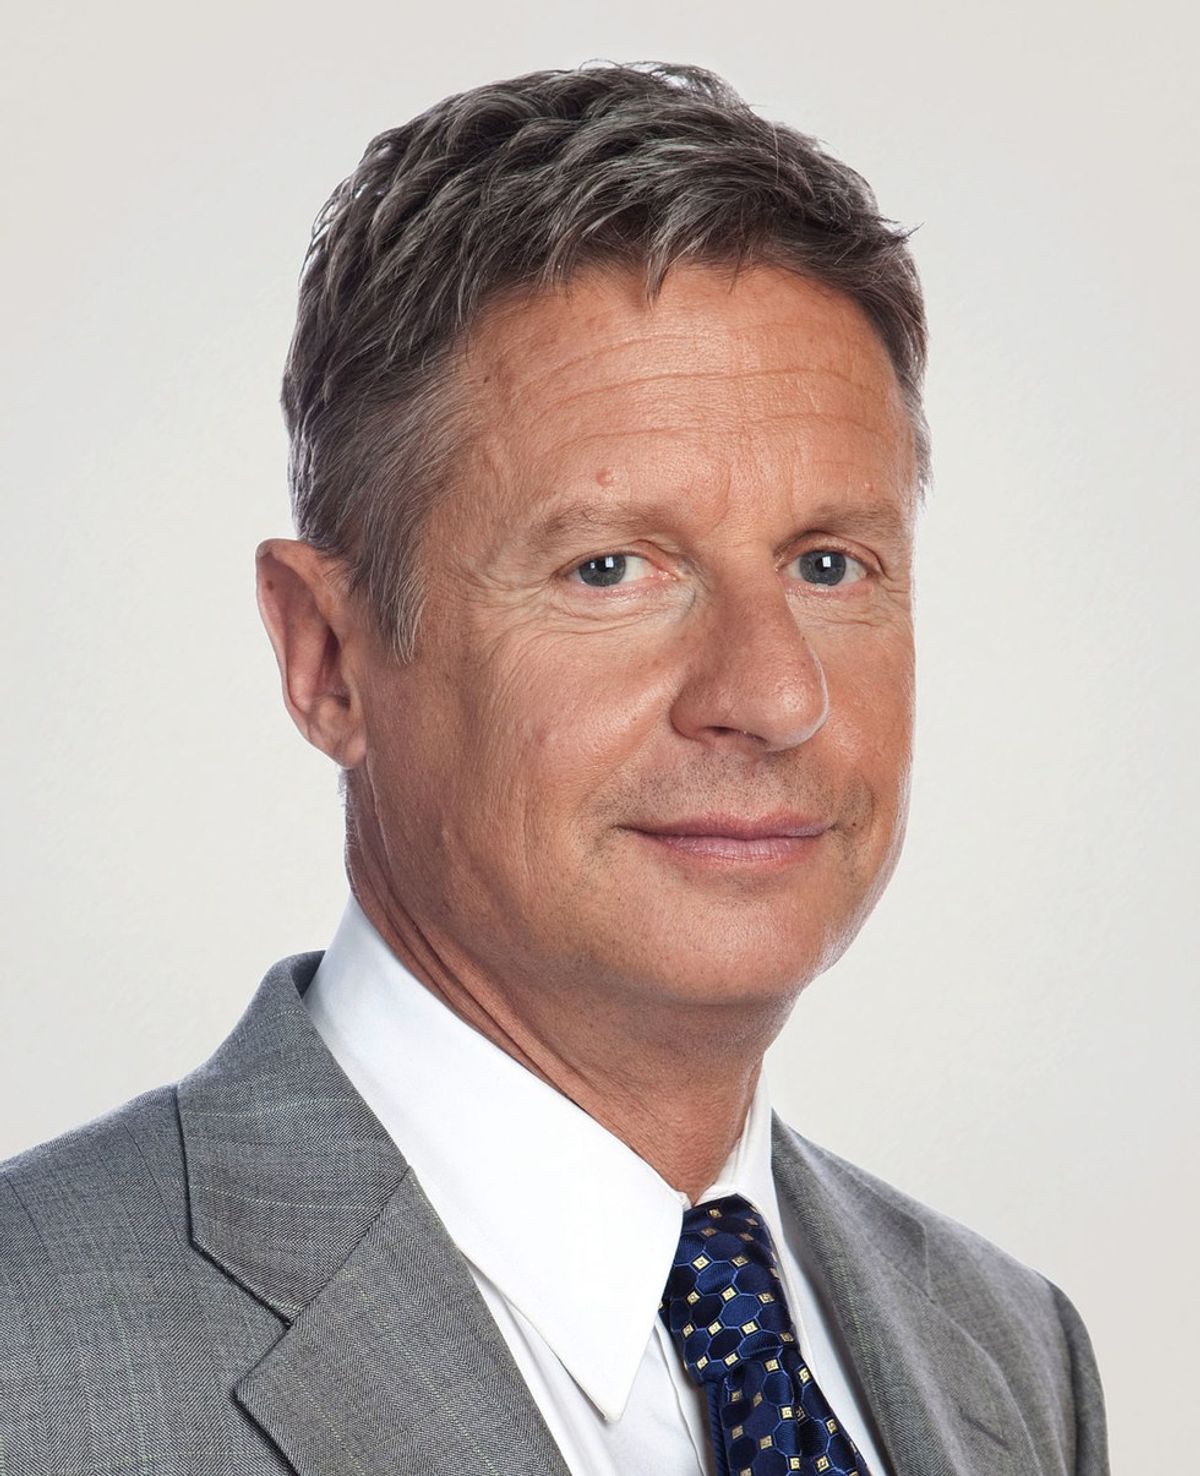 Who Is Gary Johnson And Why Does He Matter?